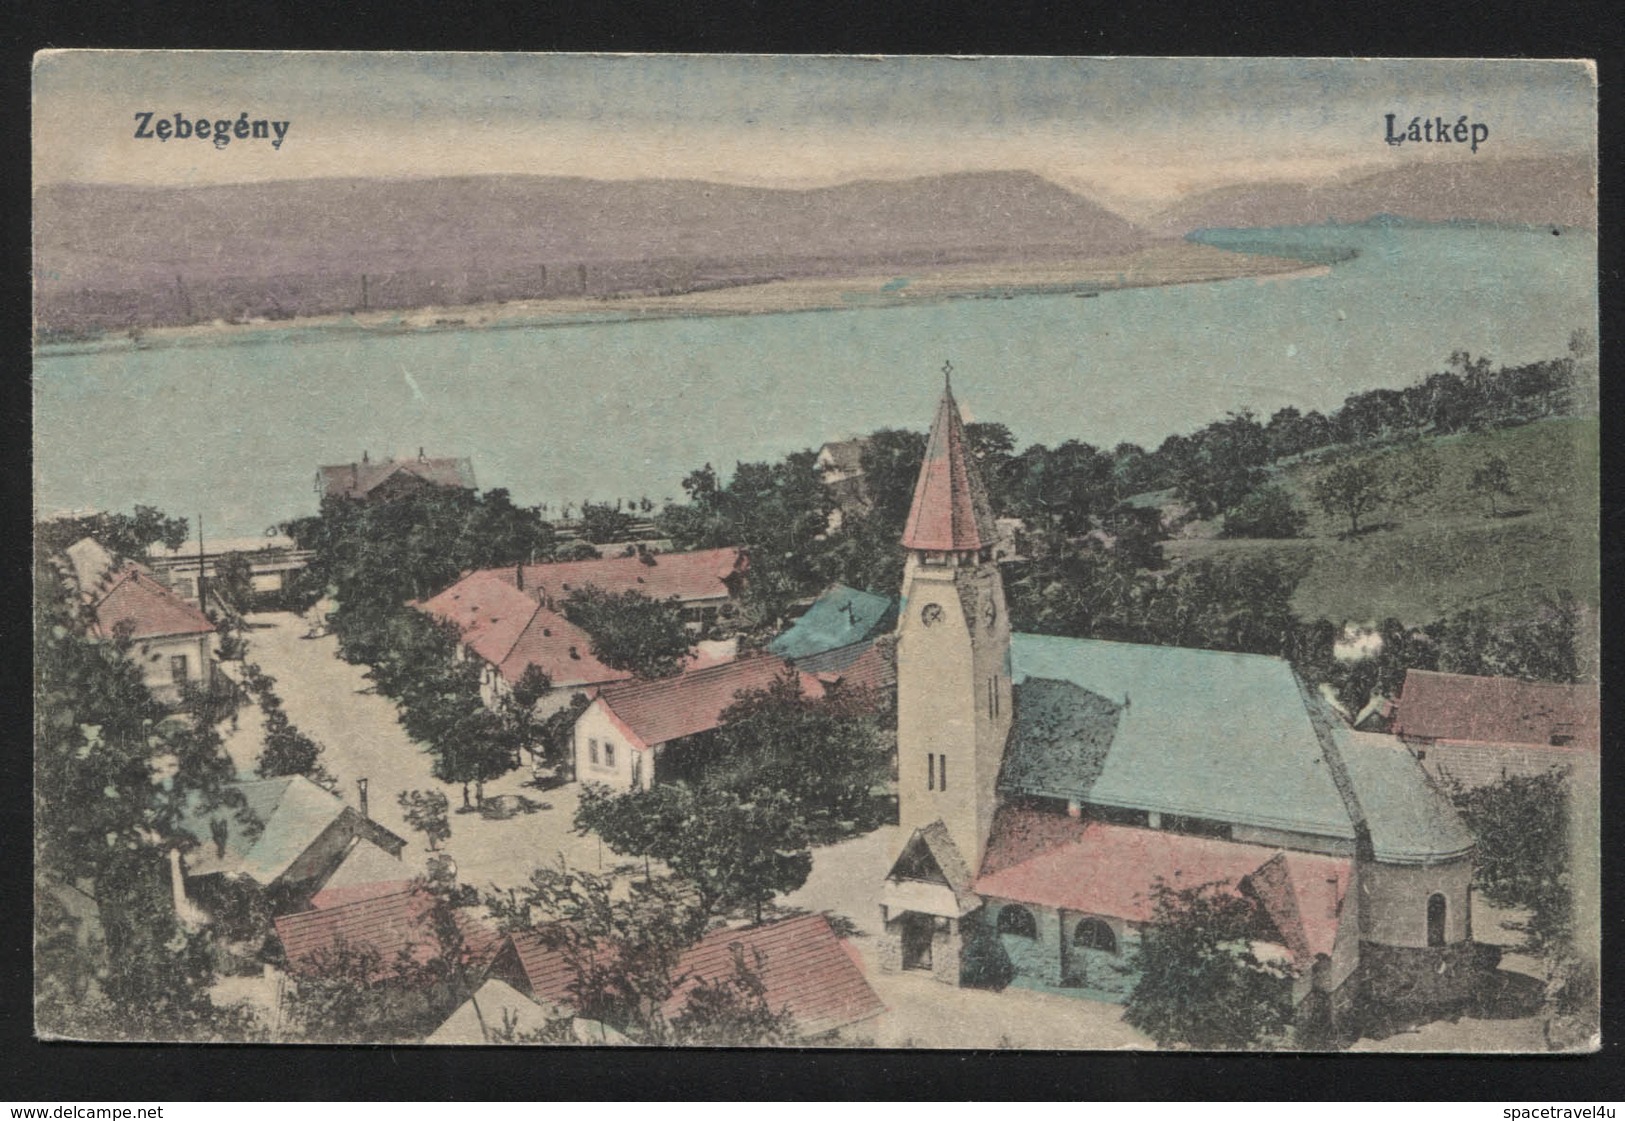 HUNGARY - Zebegény,village In Pest County - View Of The Danube-VINTAGE POSTCARD,1917(APAT#22) - Hungary